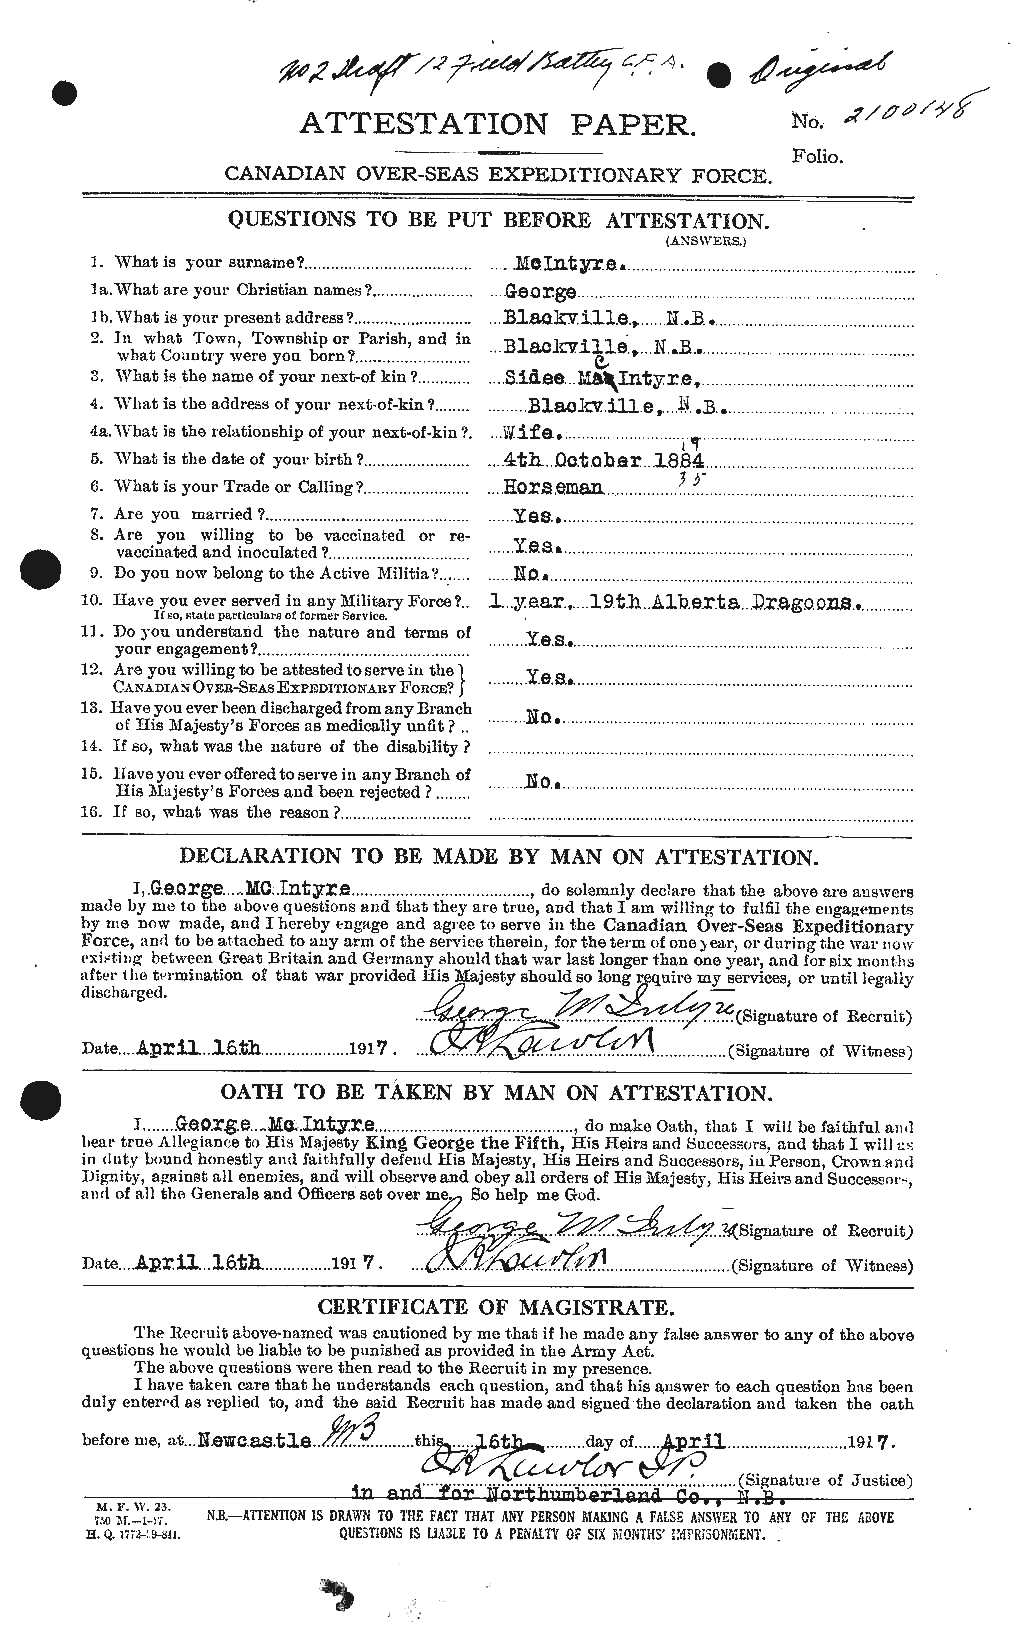 Personnel Records of the First World War - CEF 527387a